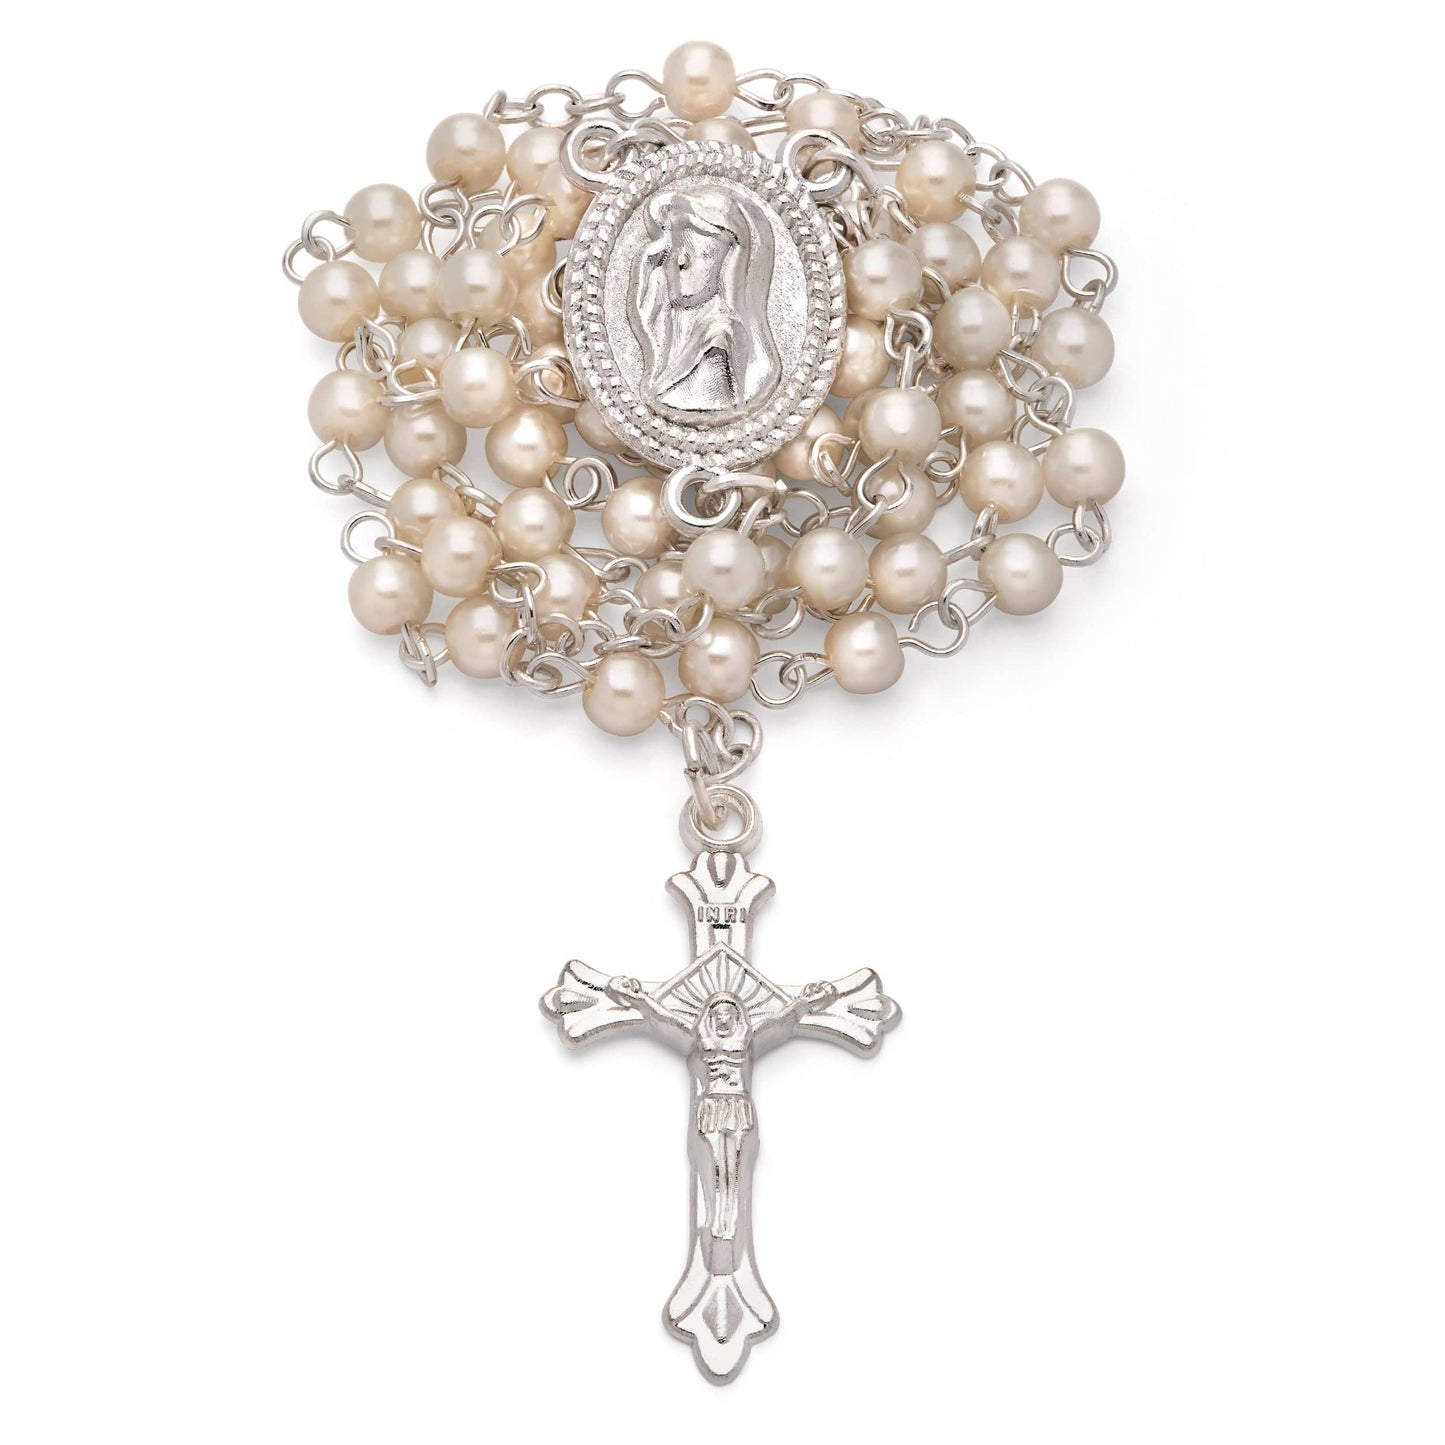 MONDO CATTOLICO Prayer Beads 40 cm (15.78 in) / 3 mm (0.11 in) Case and Rosary with the Miraculous Virgin